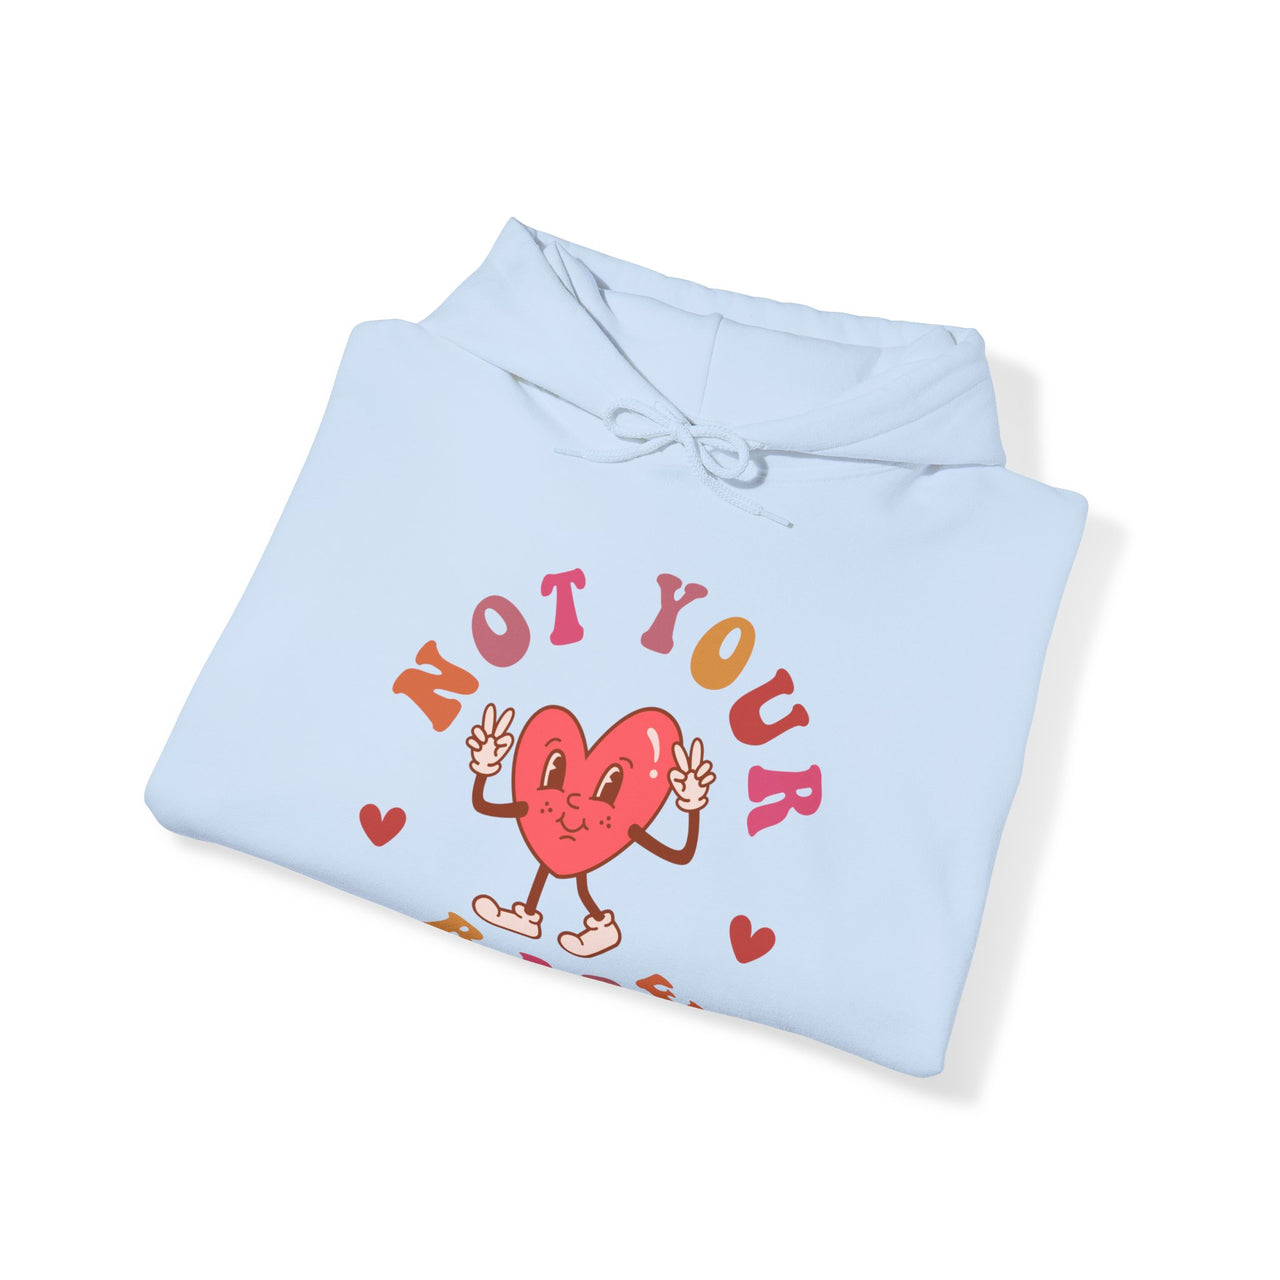 Not Your Babe Cozy Valentines Day Hoodie